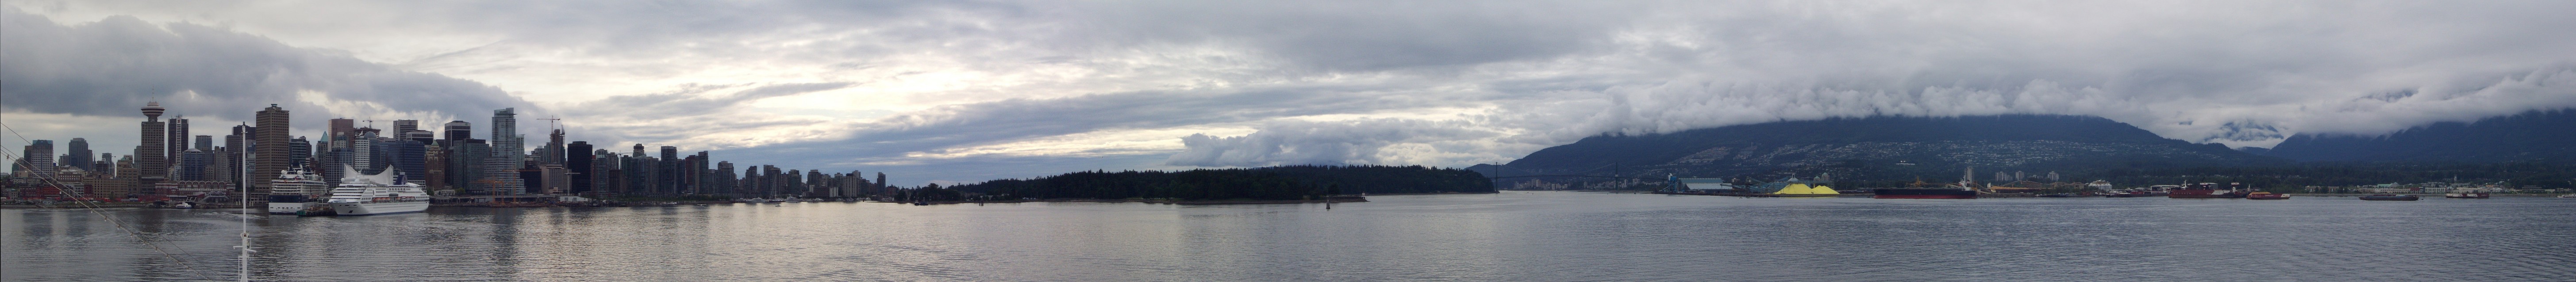 panoramic_from_ship_in_vancouver_port_3_180.jpg